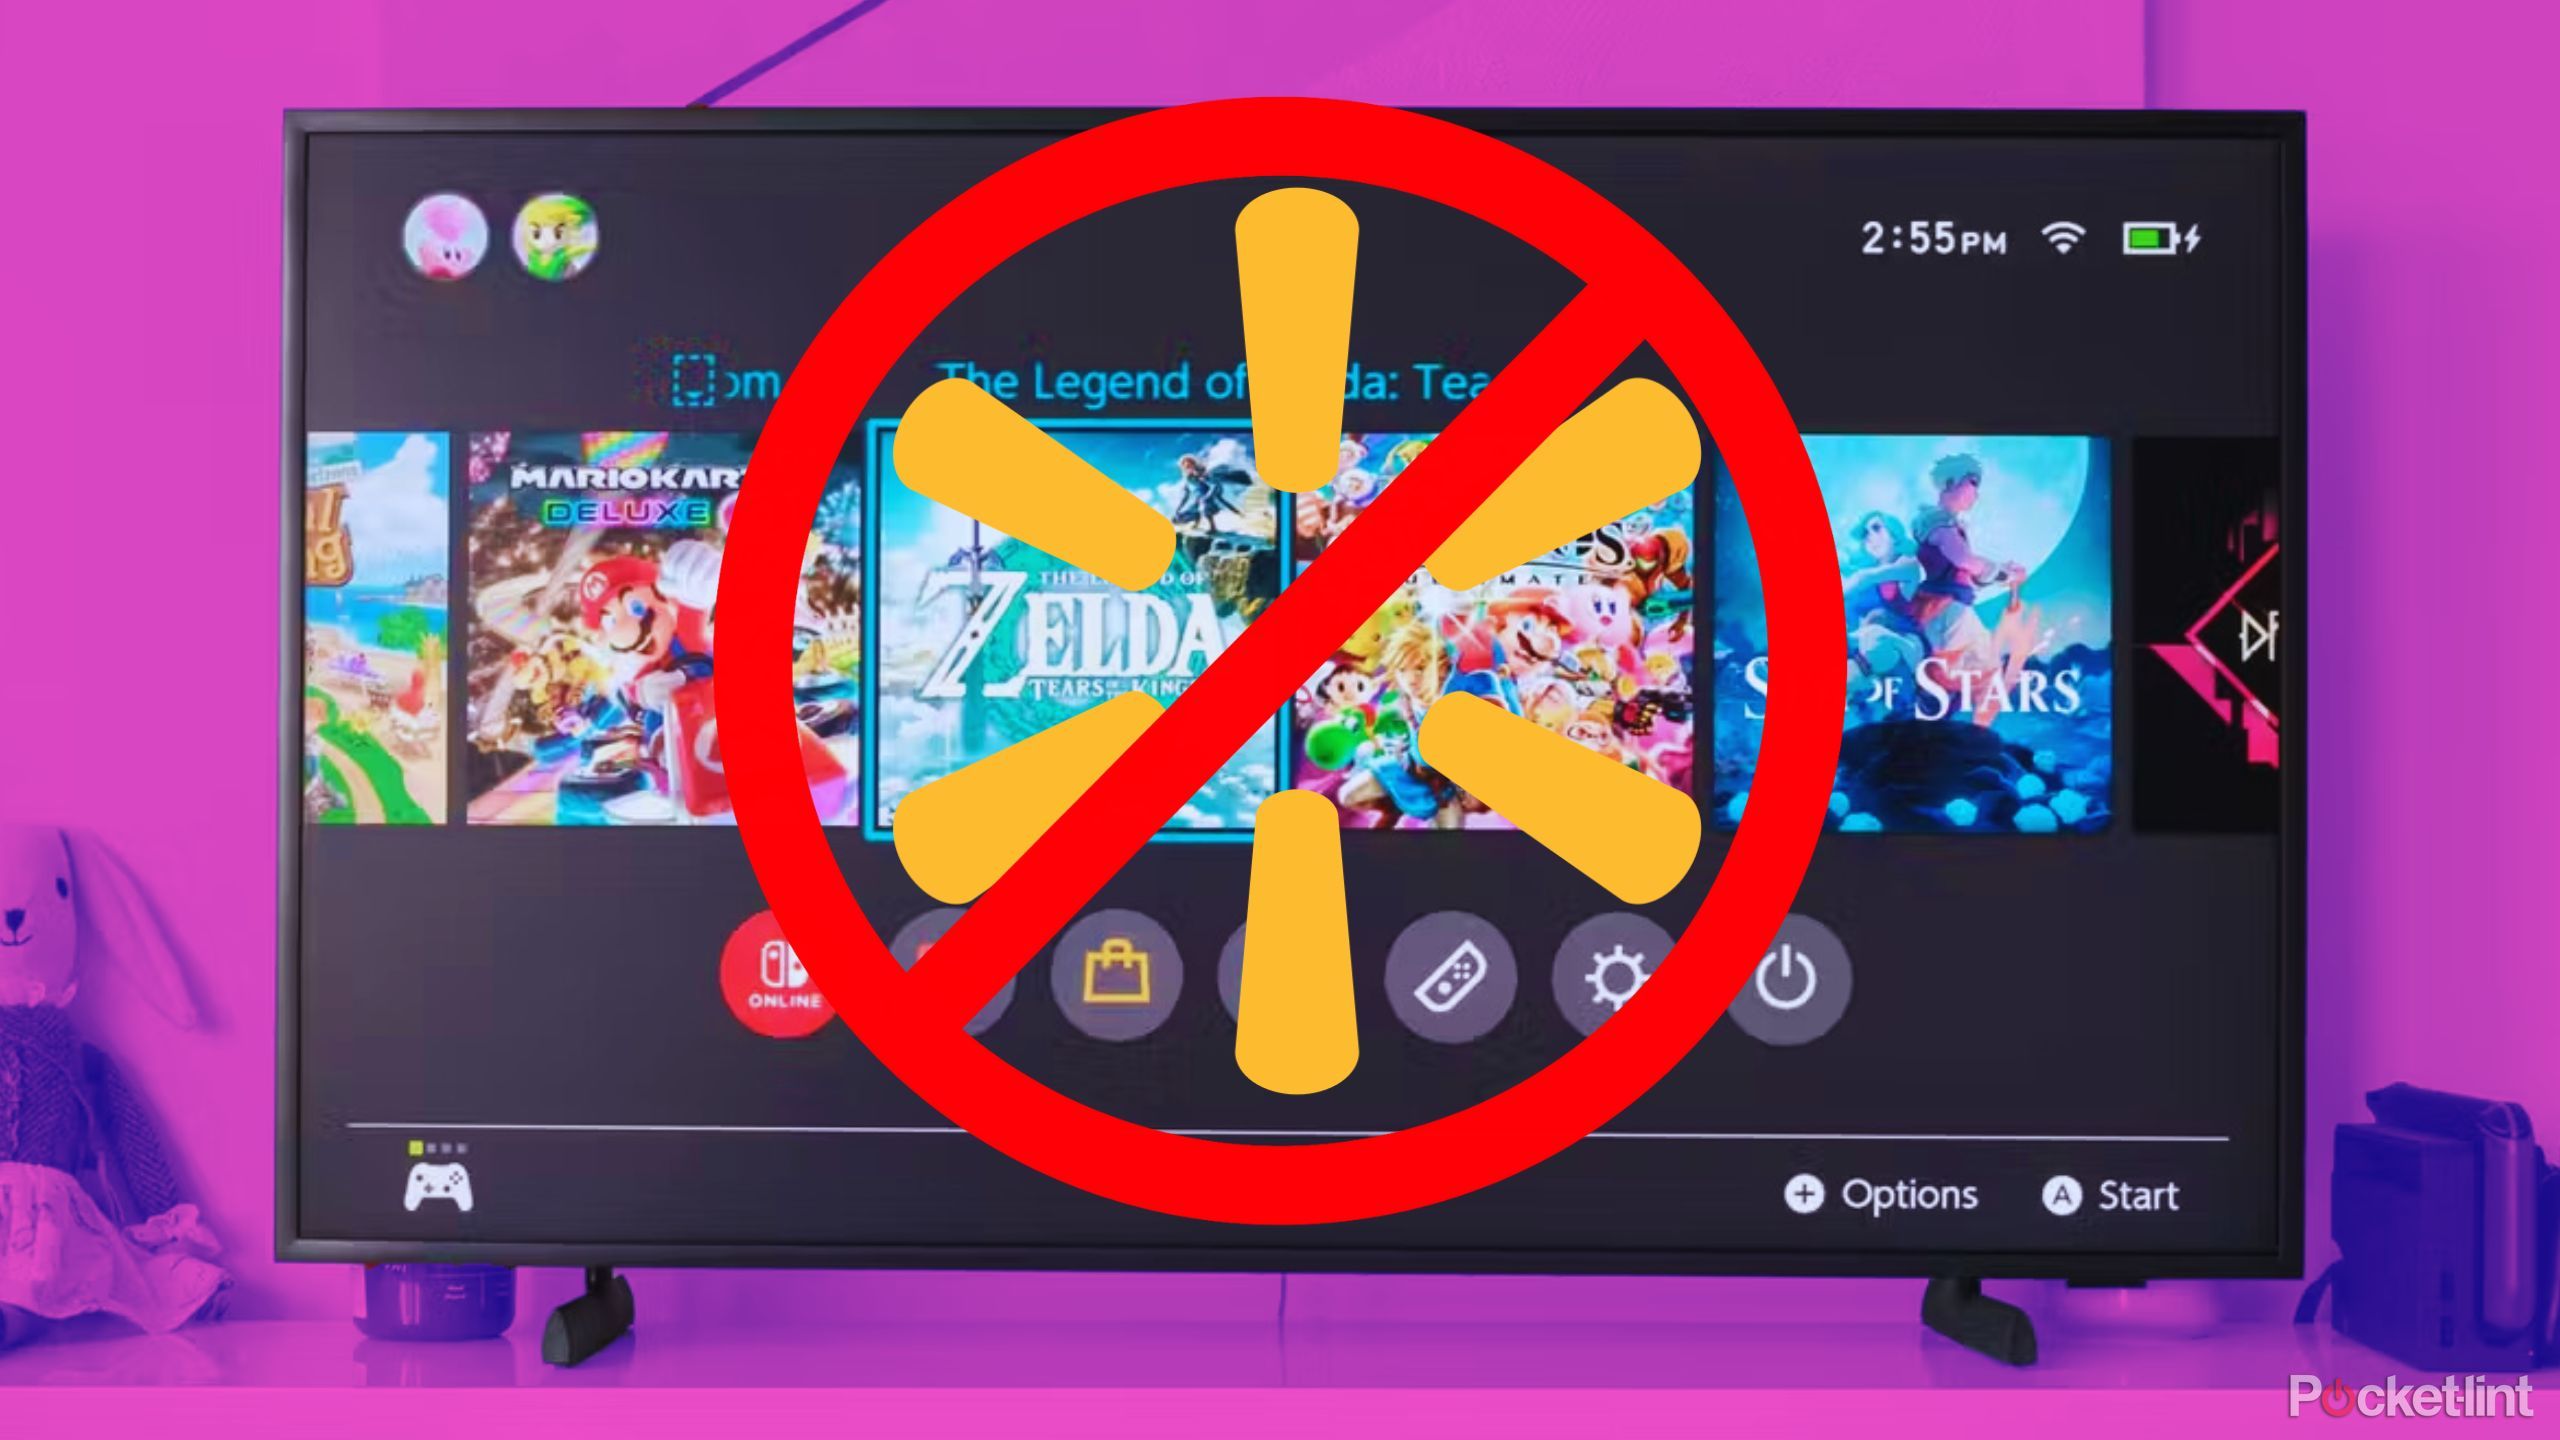 5 reasons I wouldn’t buy a TV from Walmart